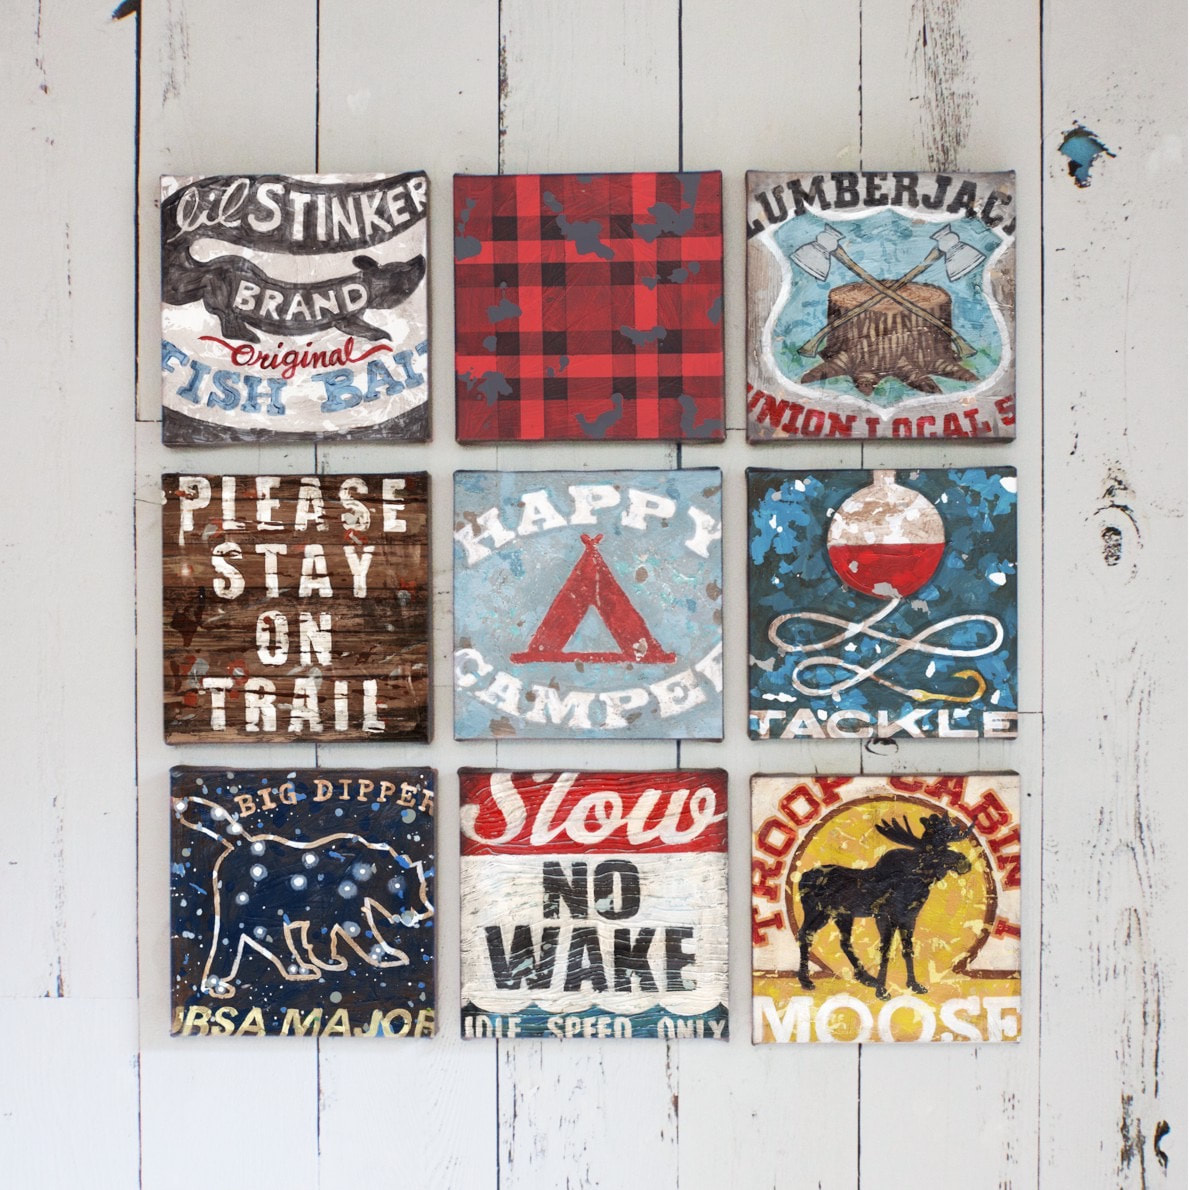 Ode' to the lumberjack trade. Perfect for boys rooms, teen spaces and  interiors for the outdoor adventurer.